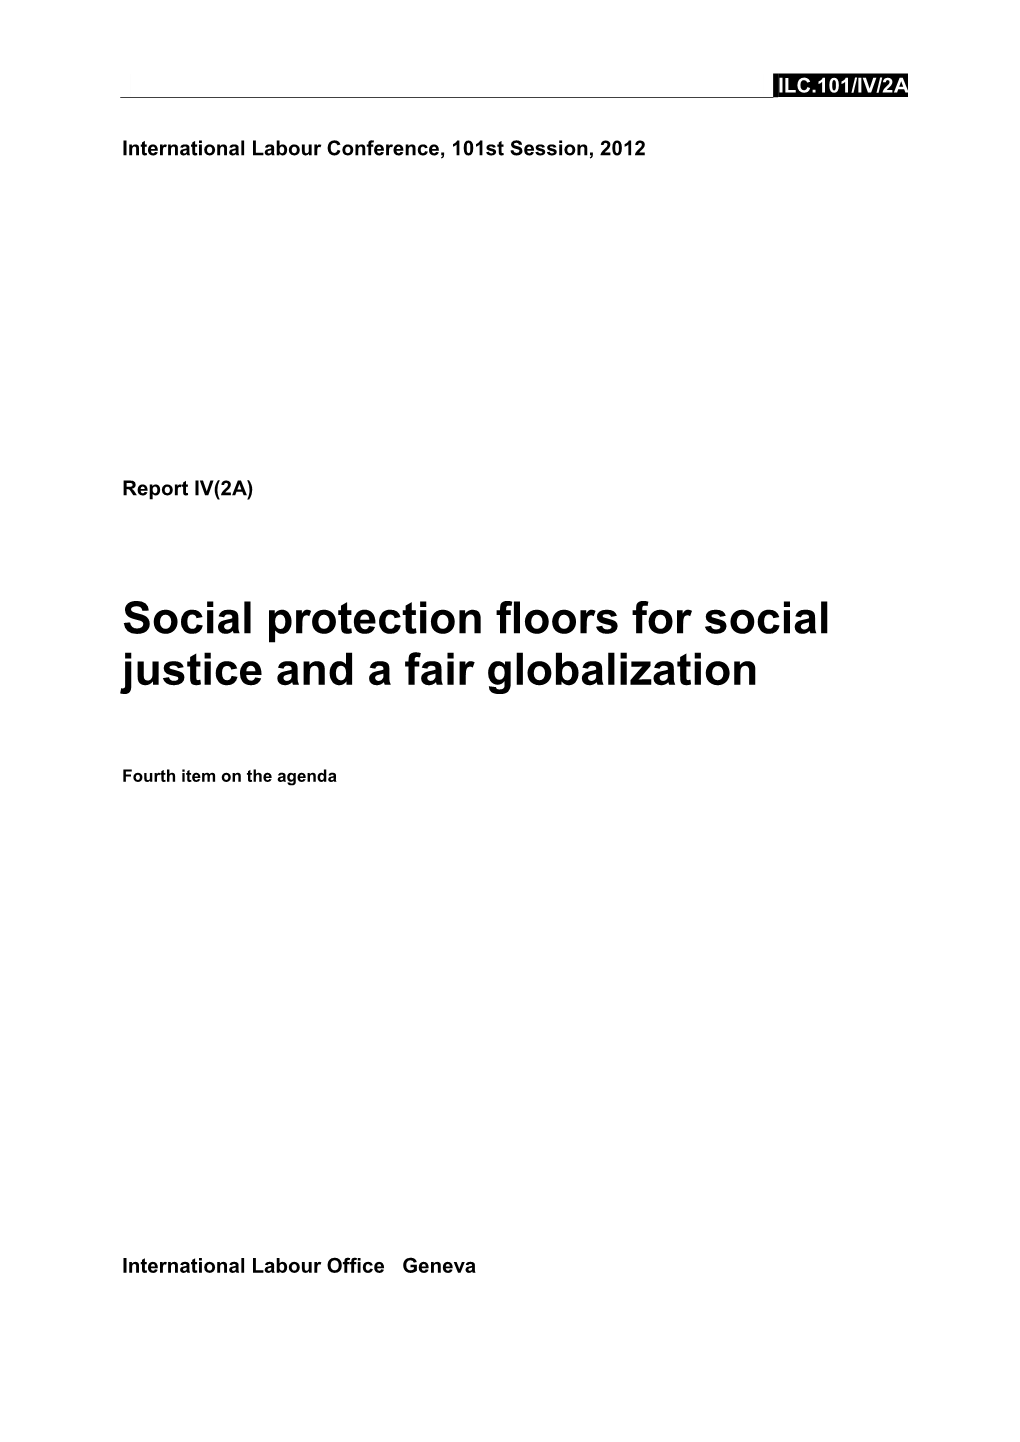 Social Protection Floors for Social Justice and a Fair Globalization